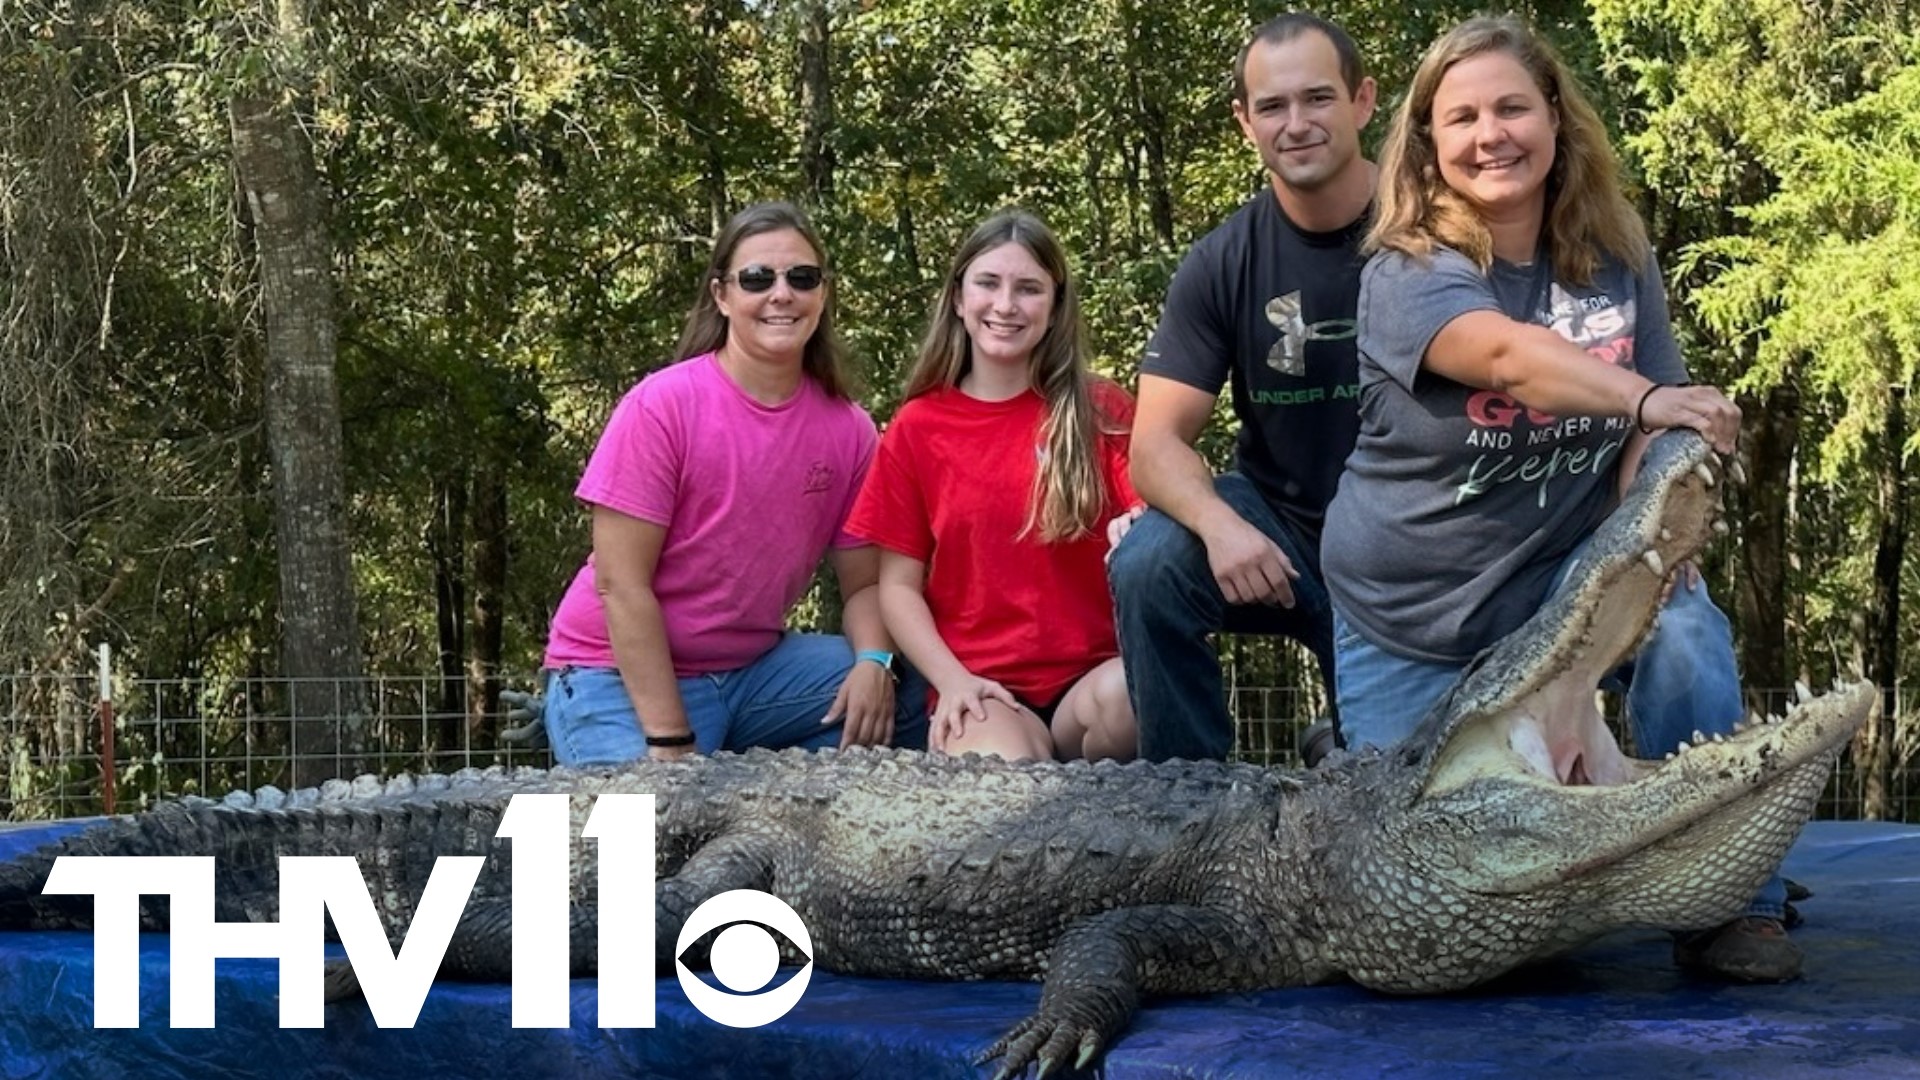 A woman in Arkansas and her unofficial Alligator wrangling team are celebrating after they made a huge catch last Friday night!